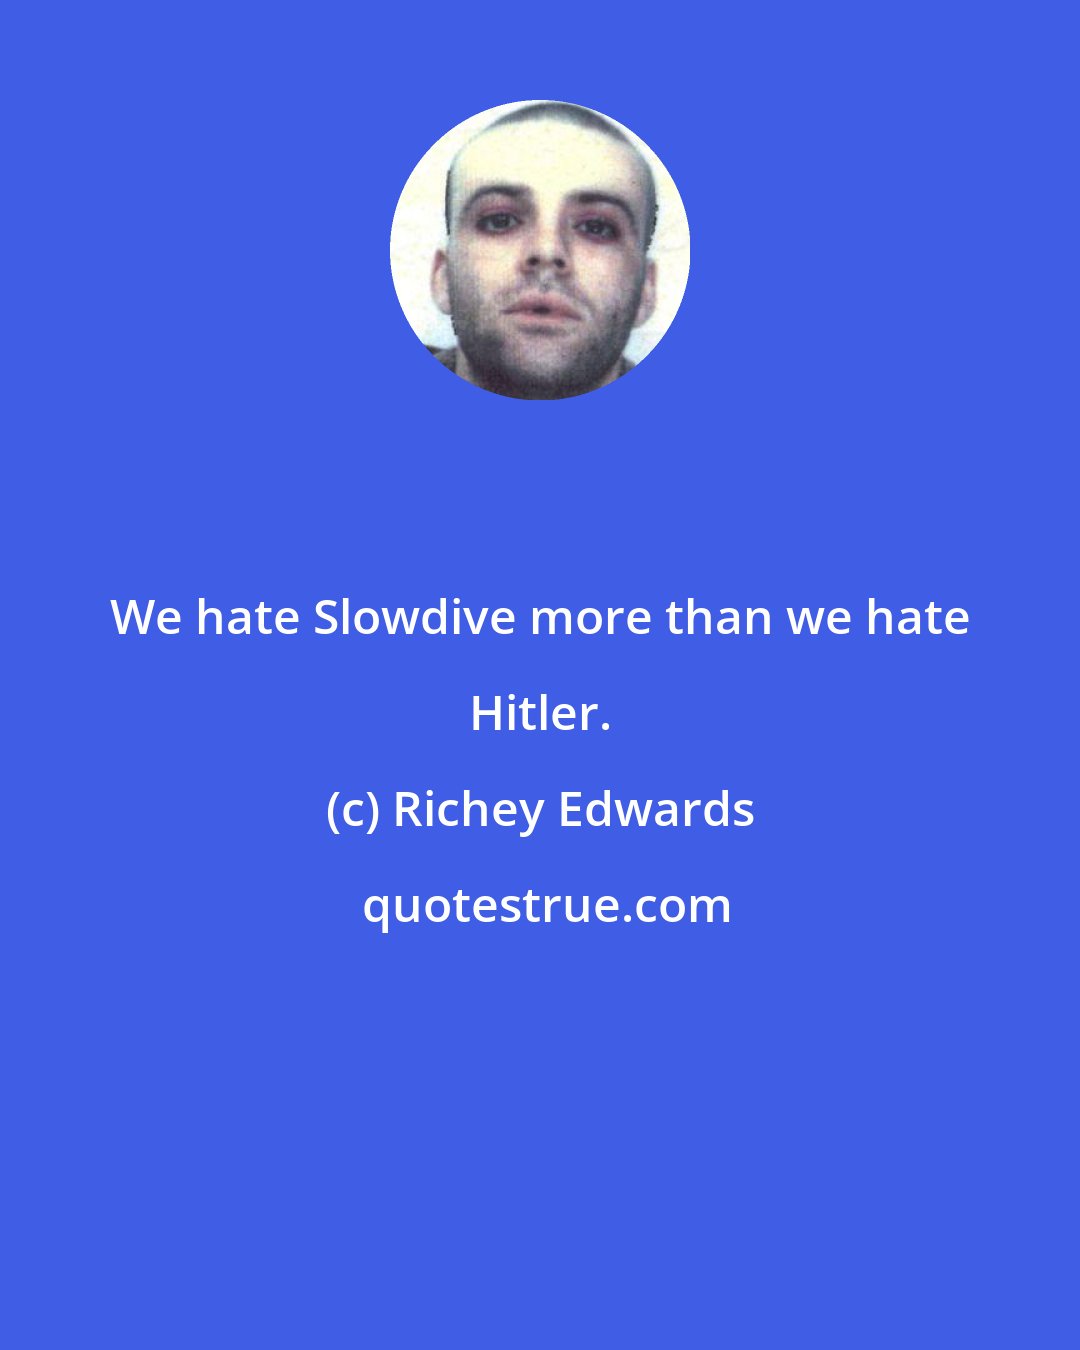 Richey Edwards: We hate Slowdive more than we hate Hitler.